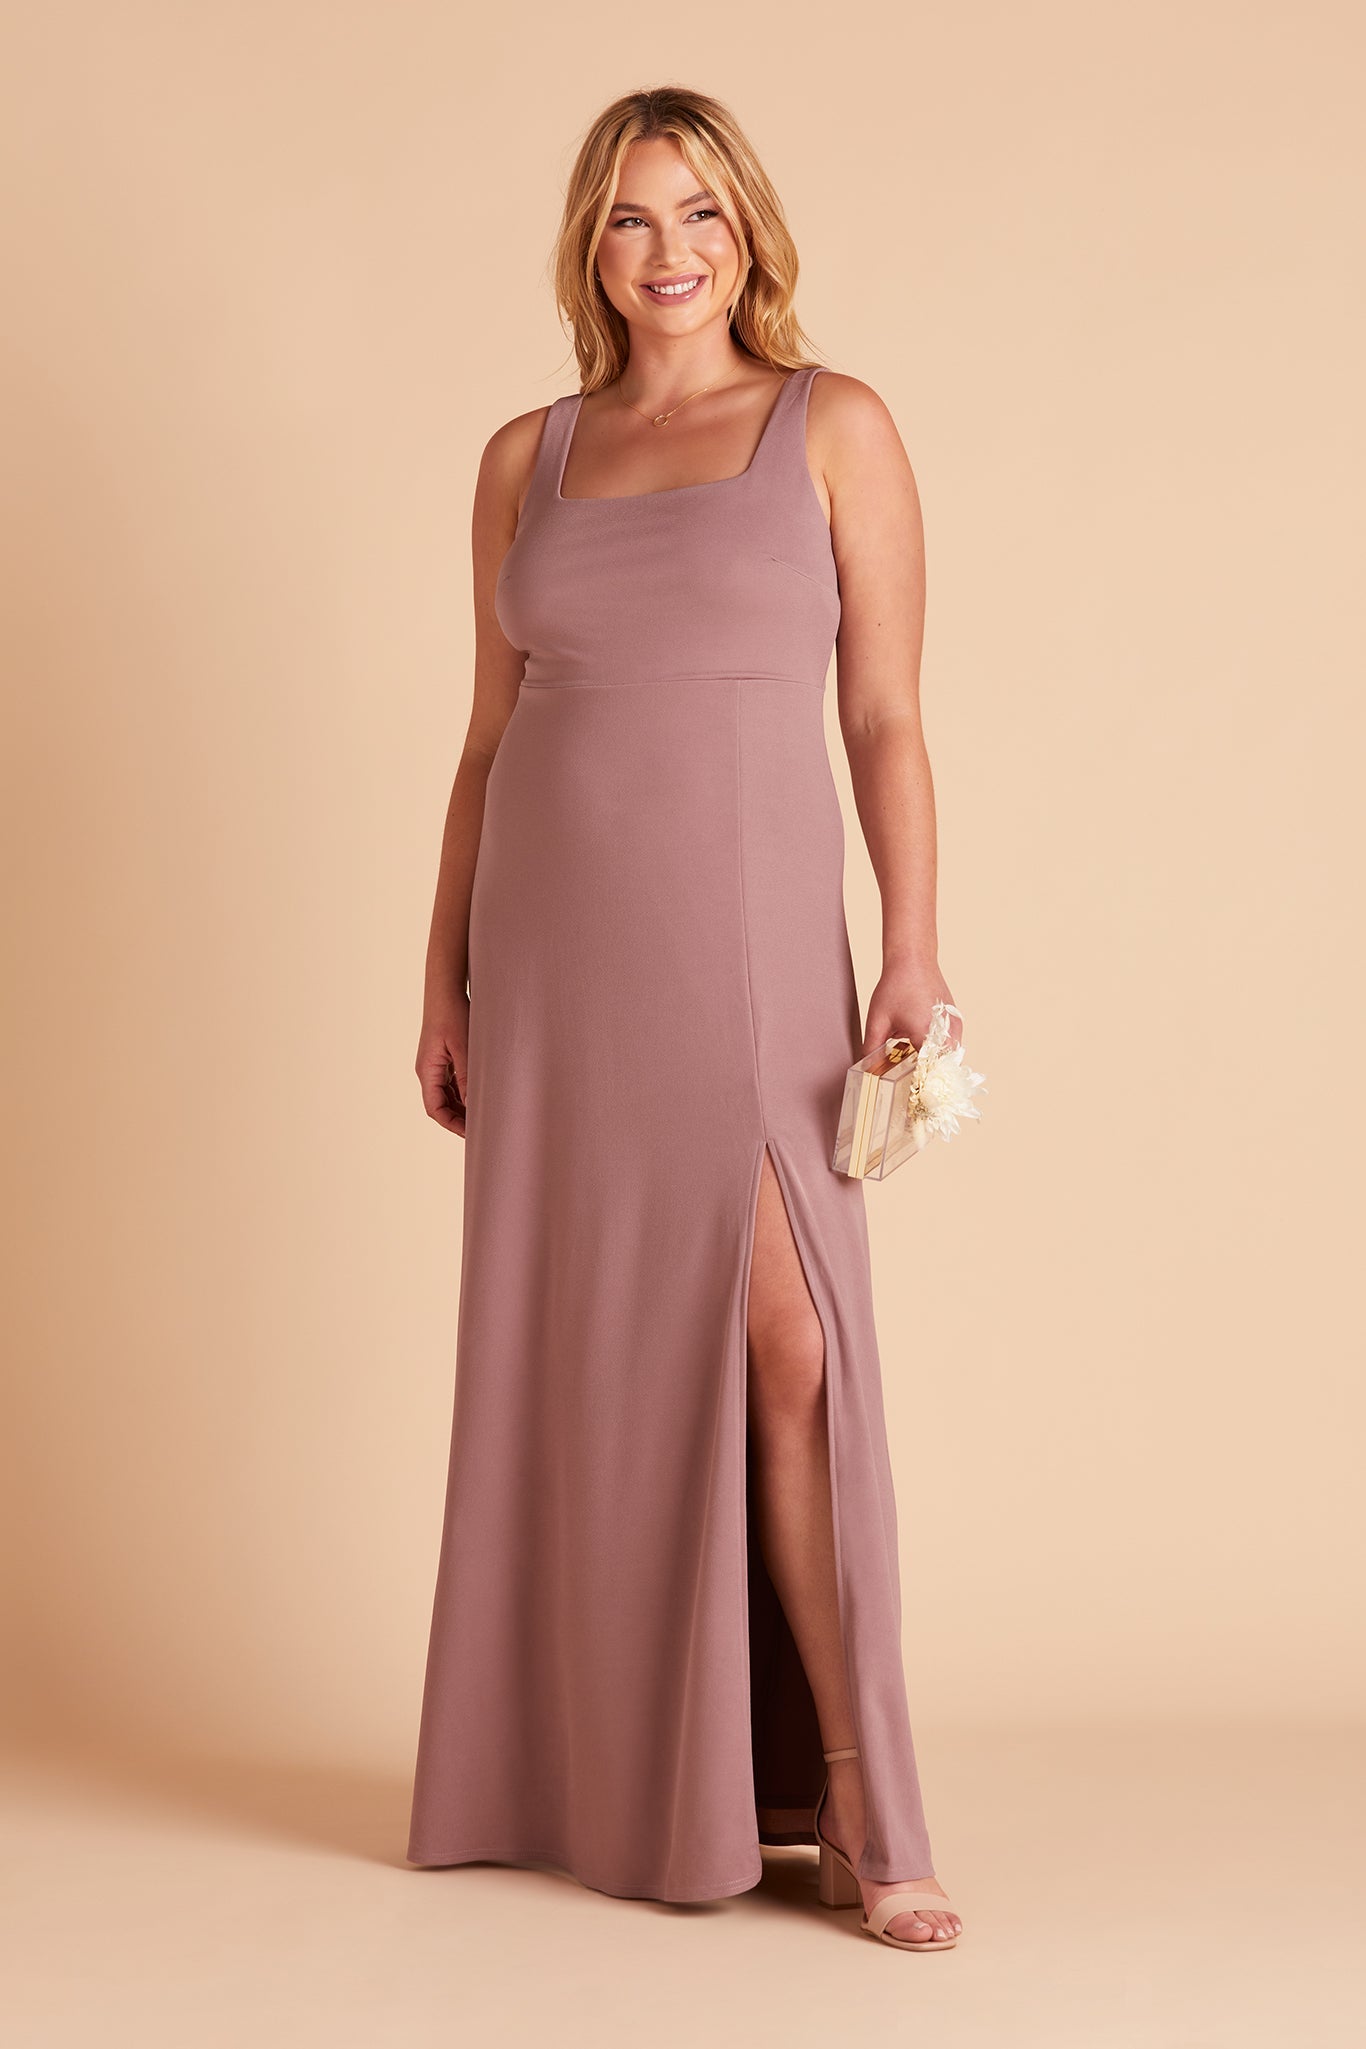 Alex convertible plus size bridesmaid dress with slit in dark mauve crepe by Birdy Grey, front view